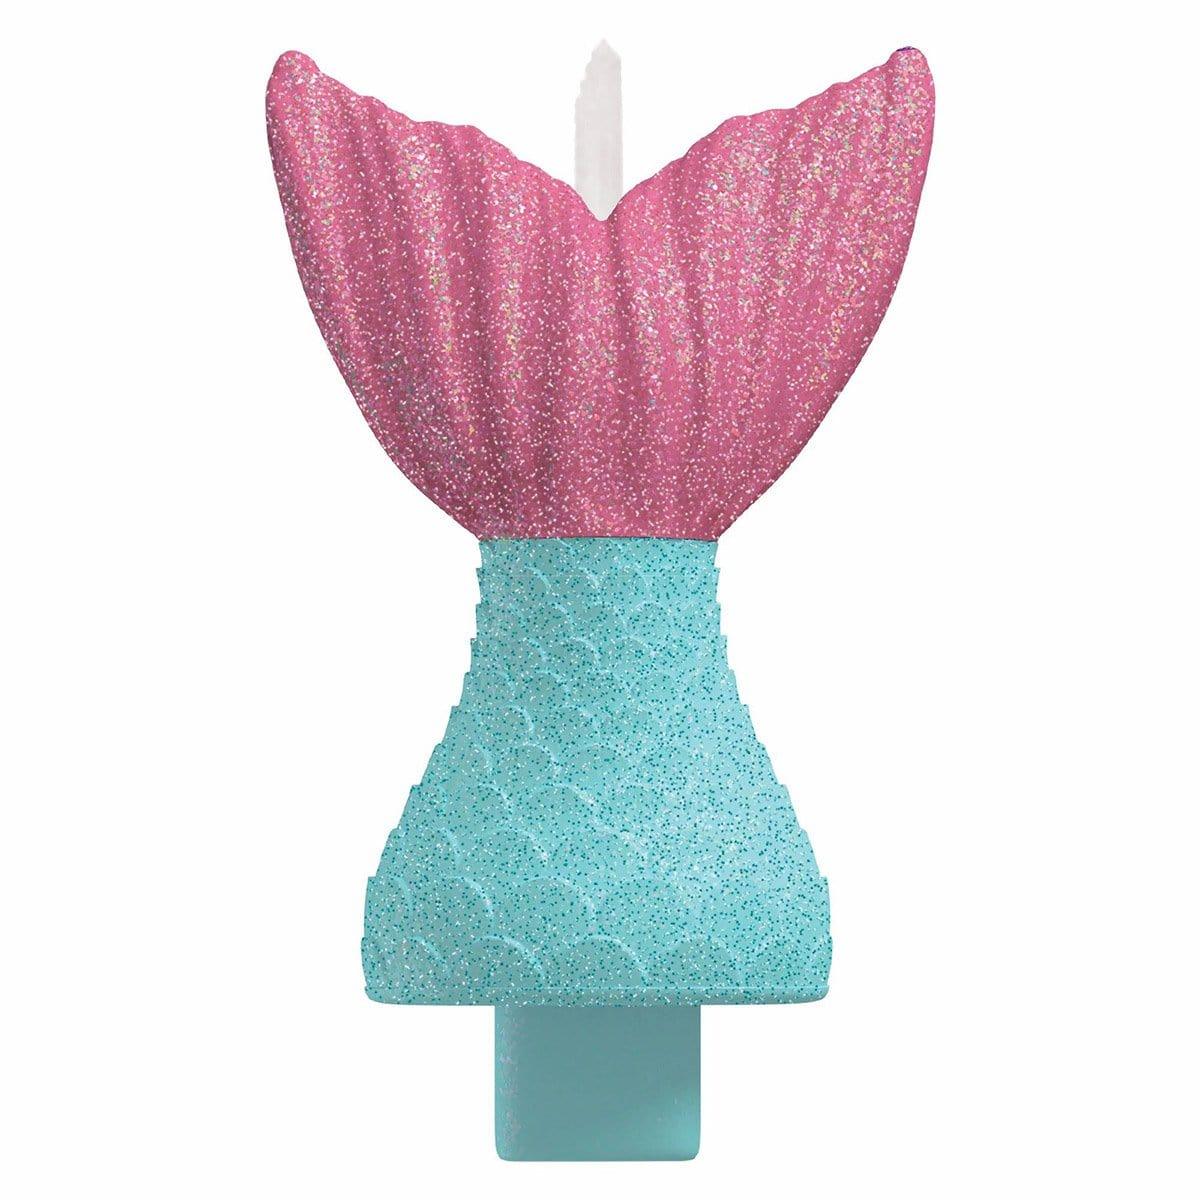 Buy Kids Birthday Mermaid Candle sold at Party Expert